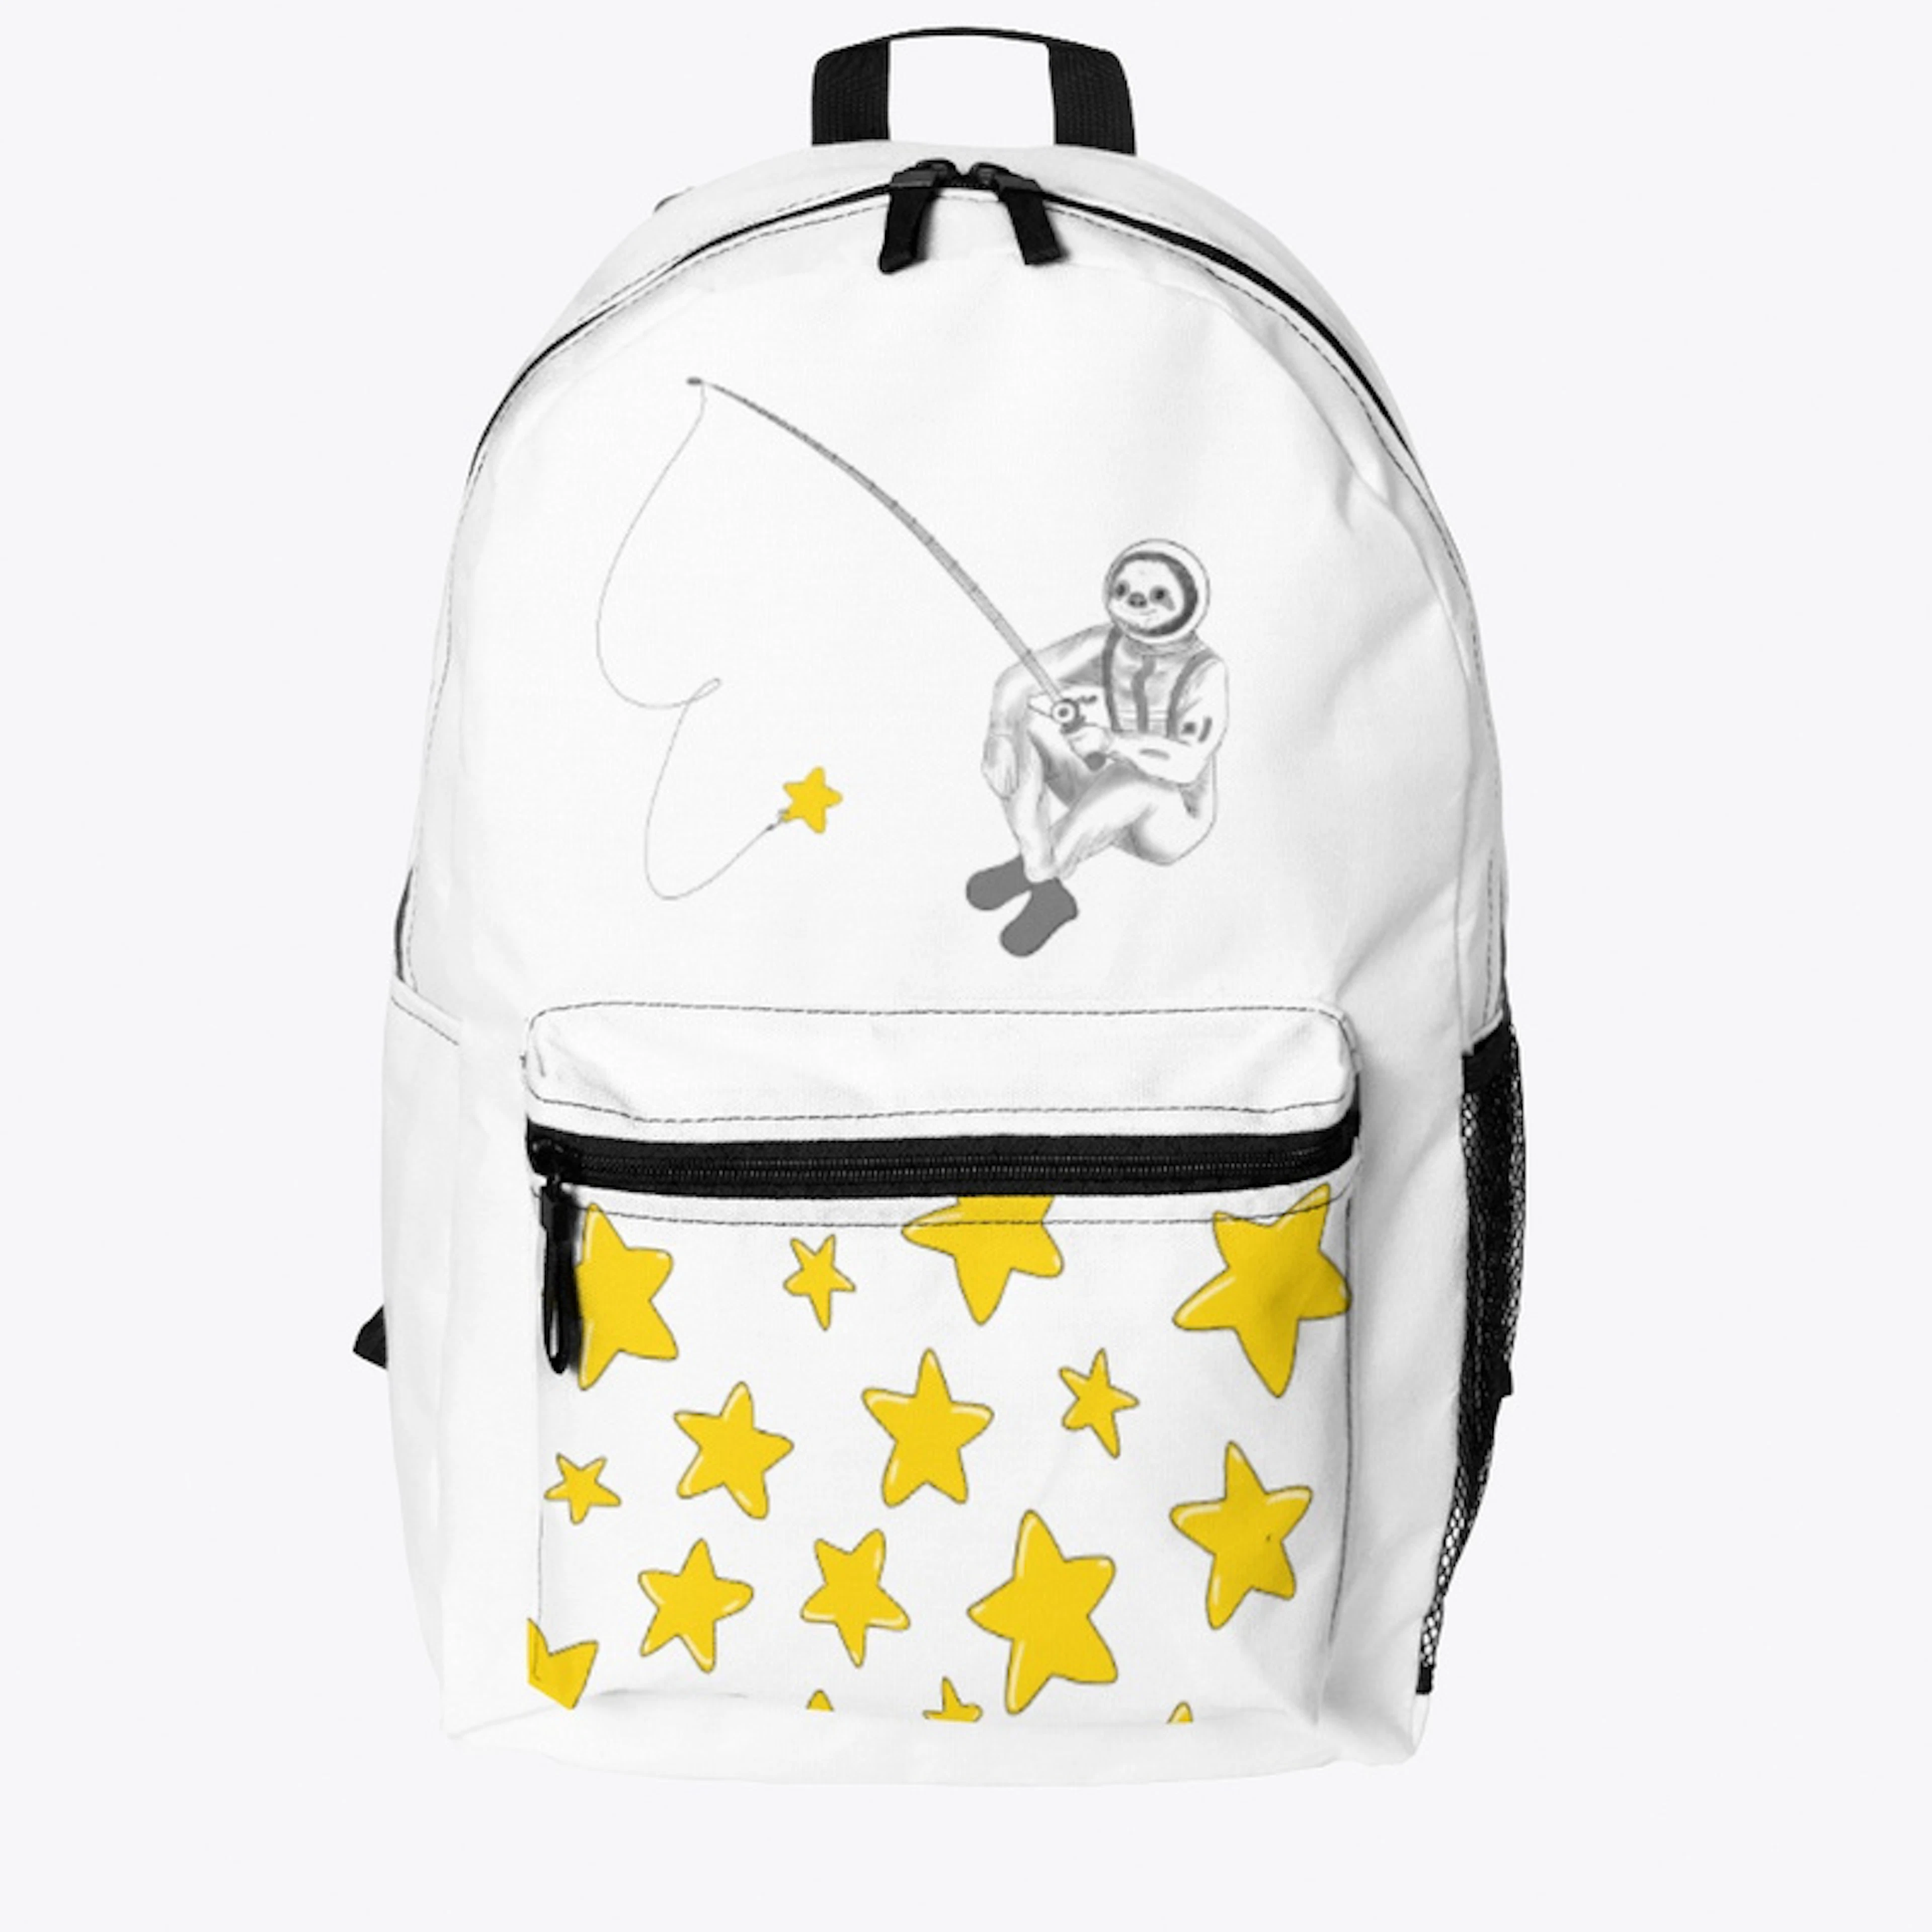 Fishing fro the Stars Backpack